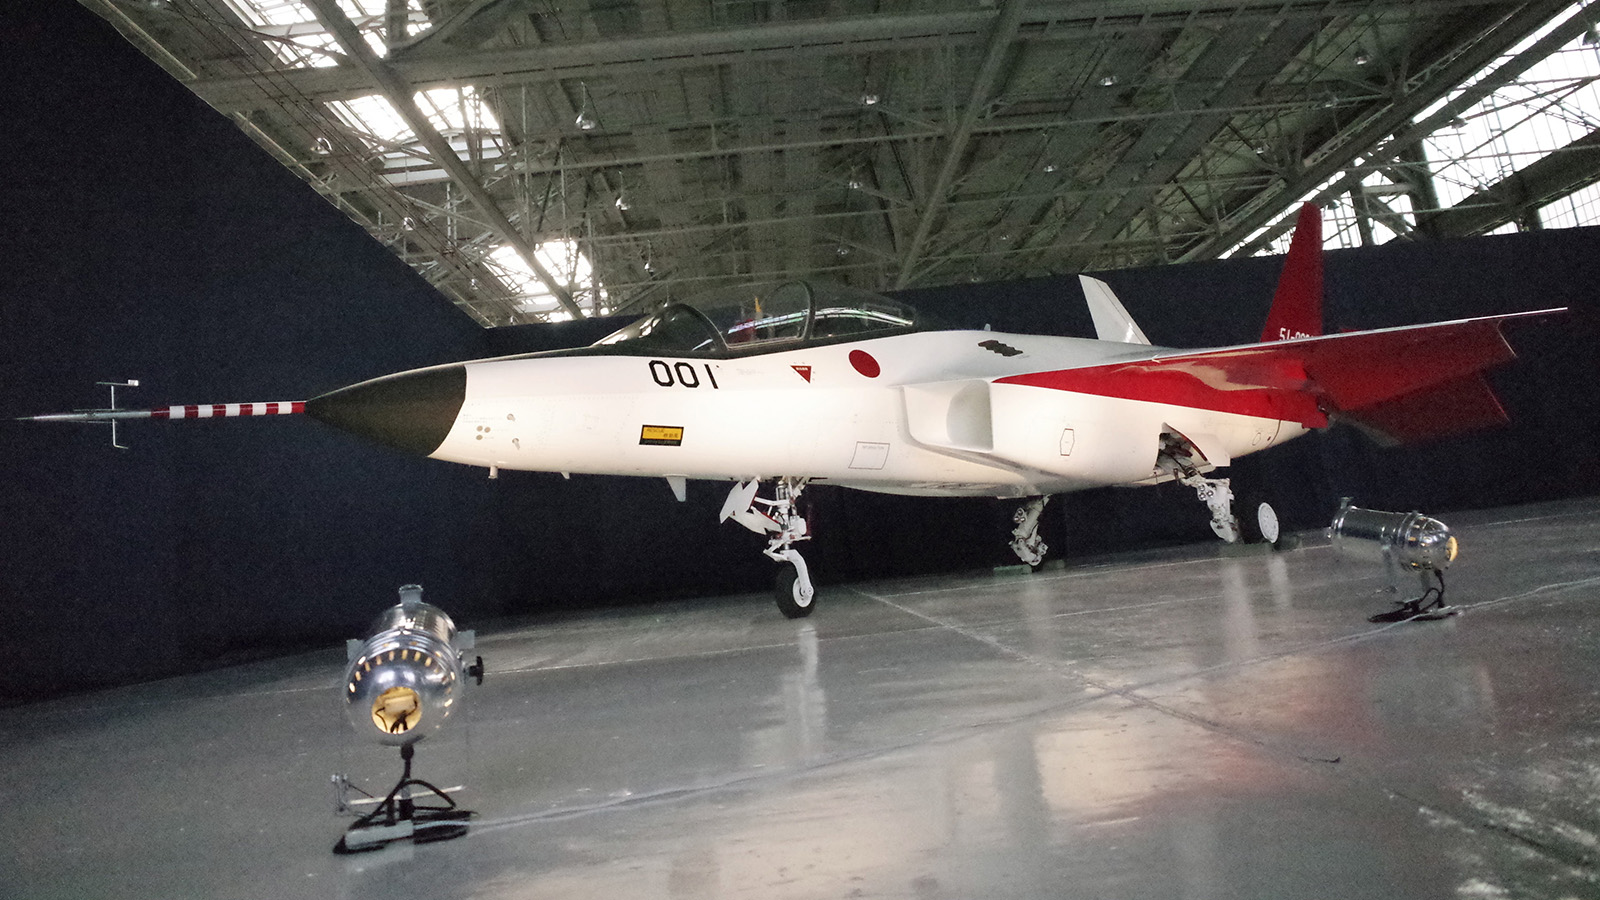 The first domestically-made stealth aircraft, X-2, sits in a hangar at Nagoya Airport in Toyoyama town, central Japan, Thursday, Jan. 28, 2016. The demonstration plane is expected to make its maiden flight sometime after mid-February. A Defense Ministry official said the technology will give Japan the option of developing its own stealth fighter jets in the future. (AP Photo/Emily Wang)